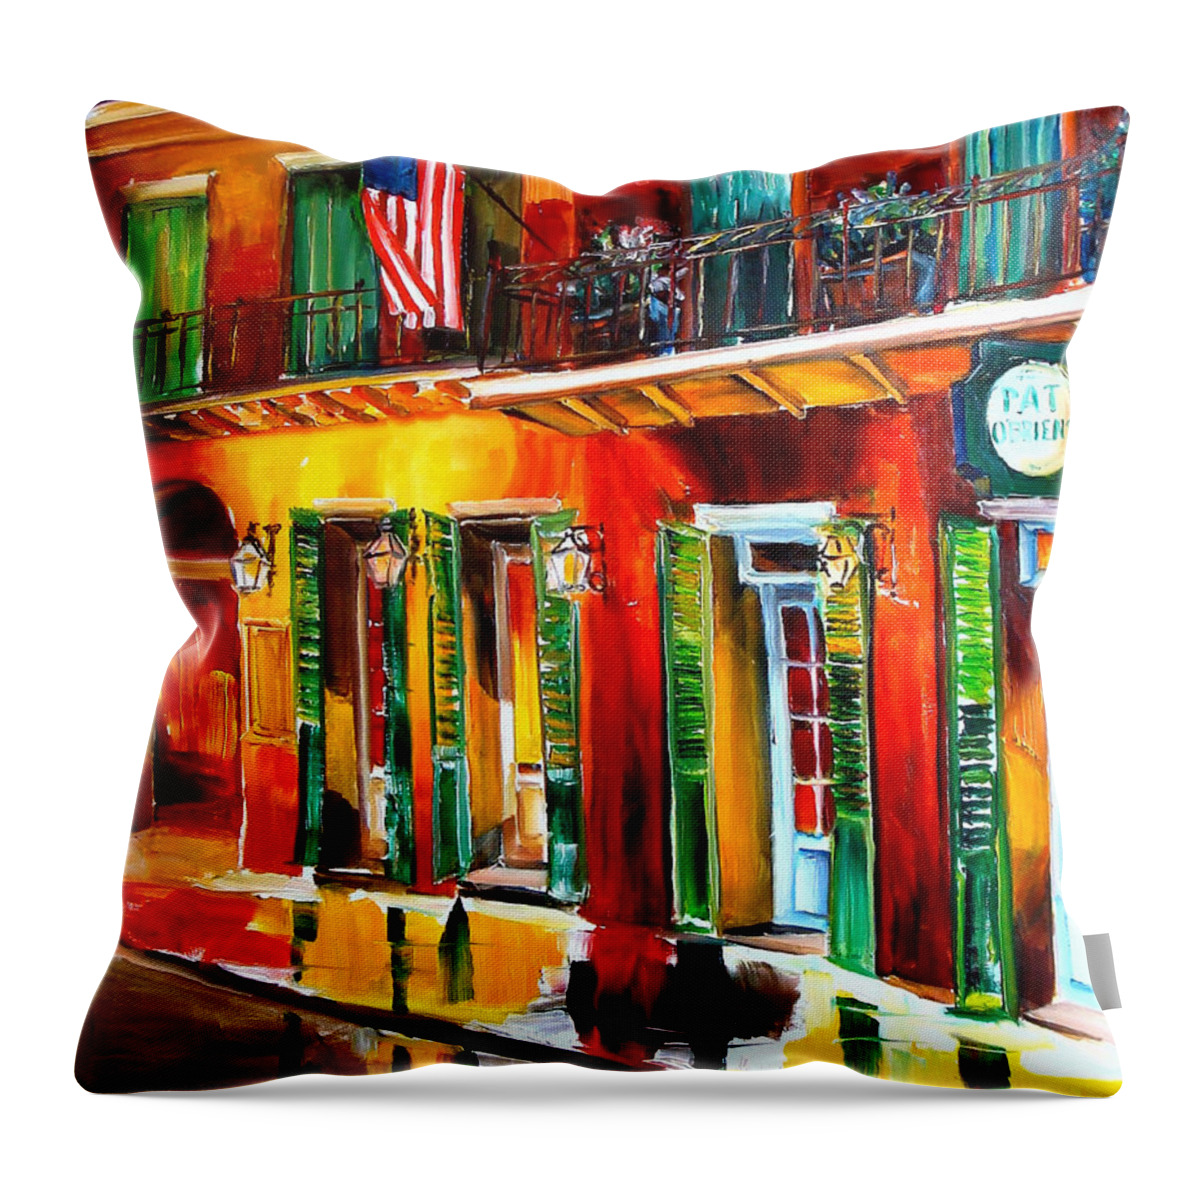 New Orleans Throw Pillow featuring the painting Outside Pat O'Brien's Bar by Diane Millsap